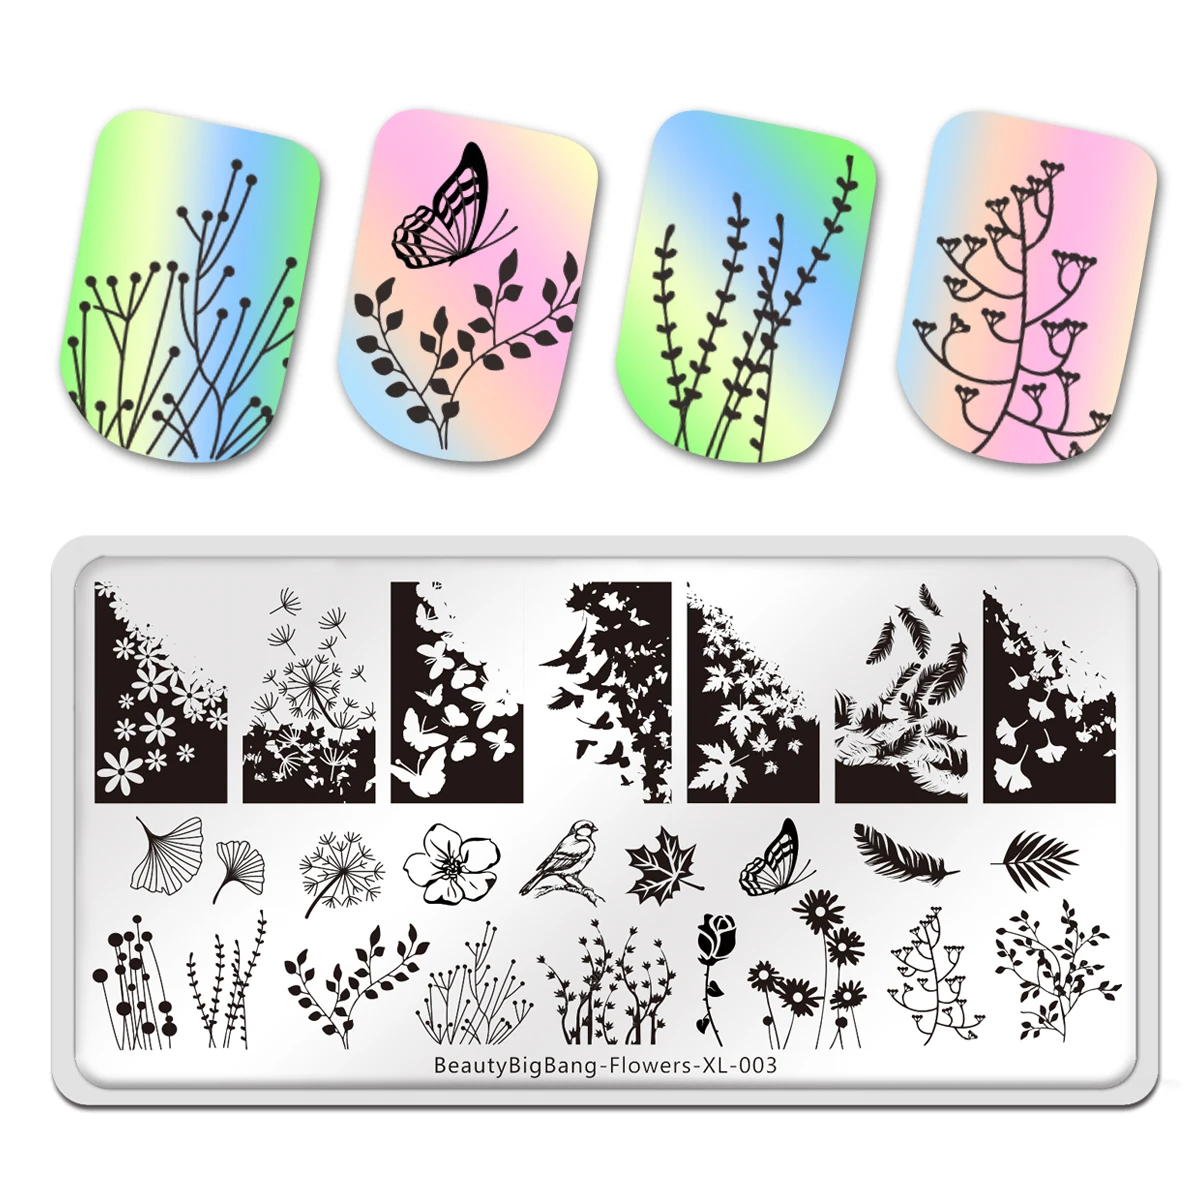 

BeautyBigBang Stamping Plates Leaves Tree Bird Dandelion Plants Image Stainless Steel Stencil Nail Art Template Flower XL-003